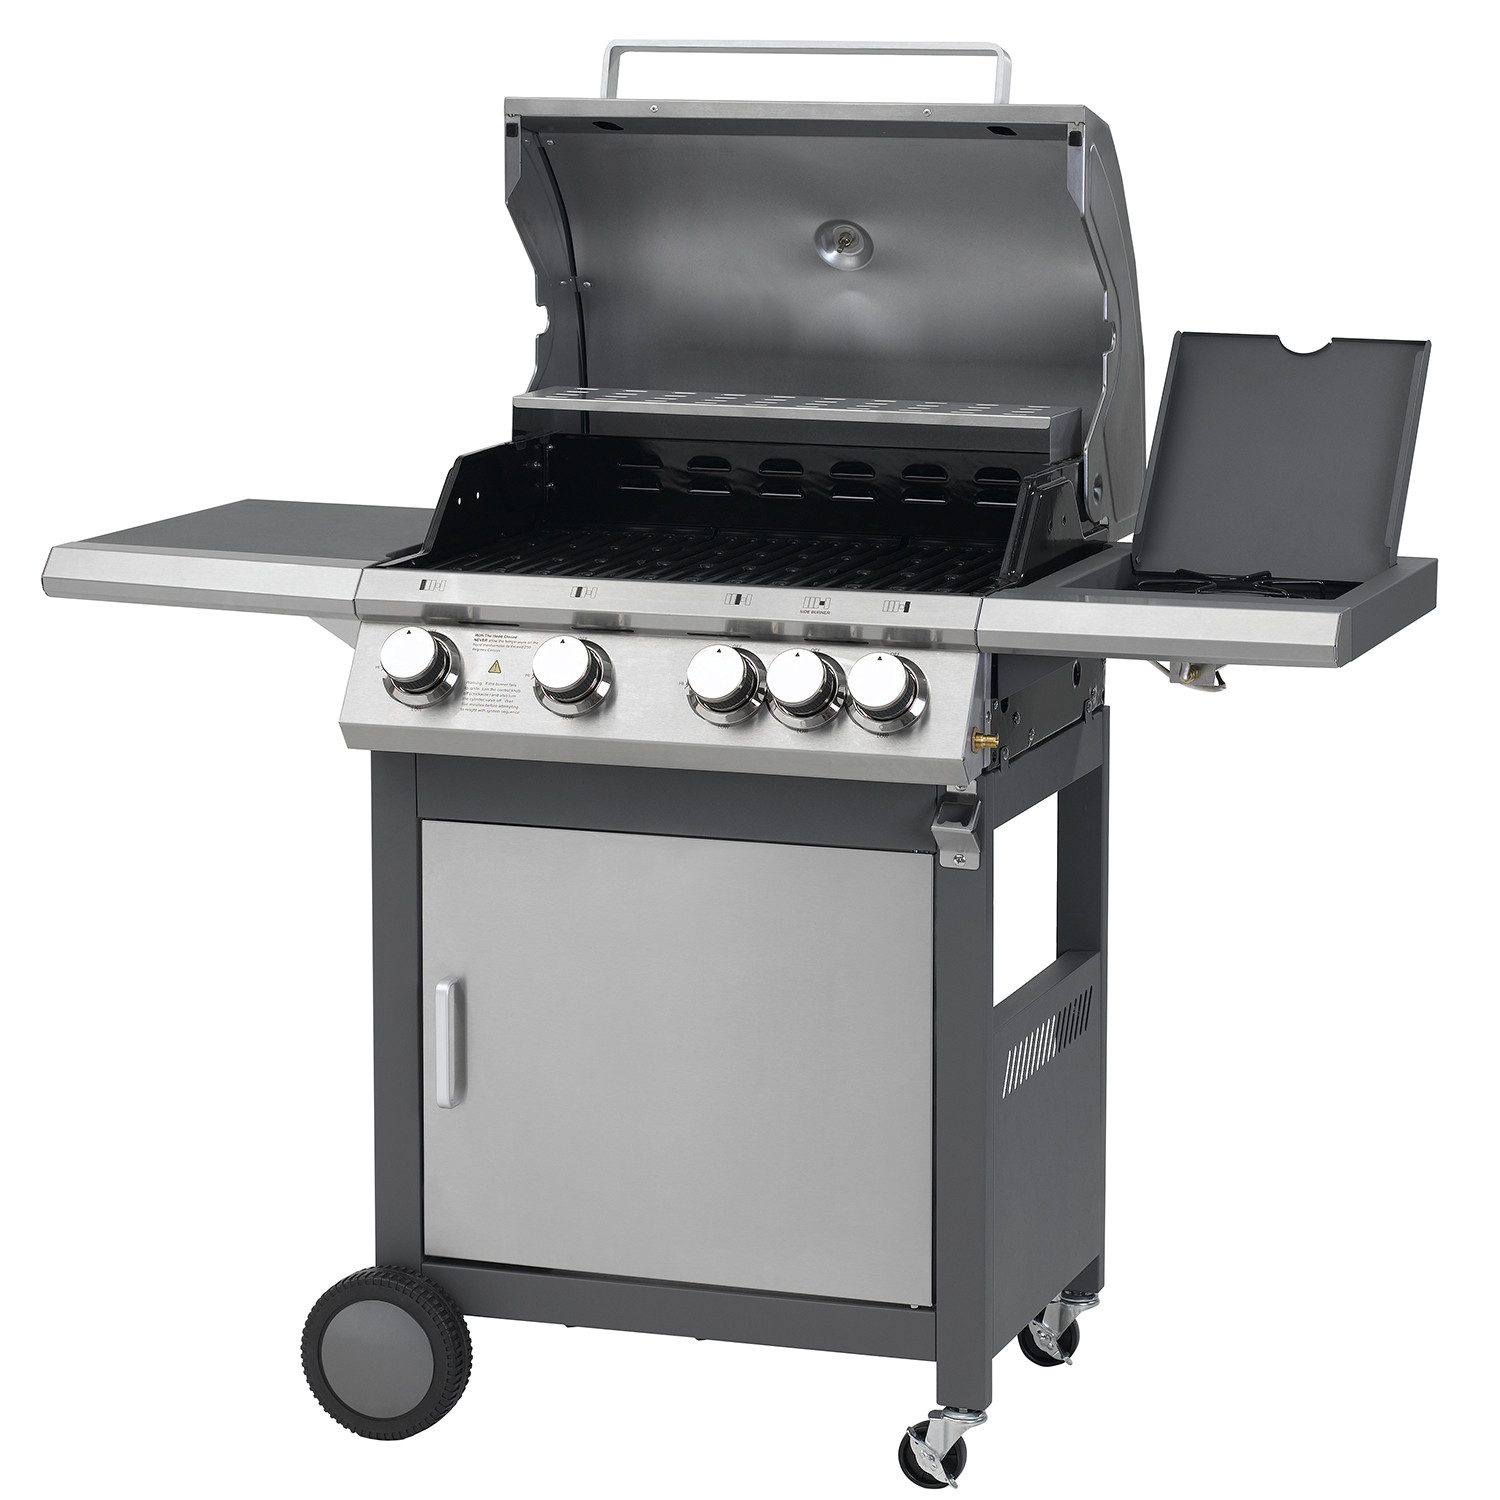 Rockland Gas Grill BBQ Image 1